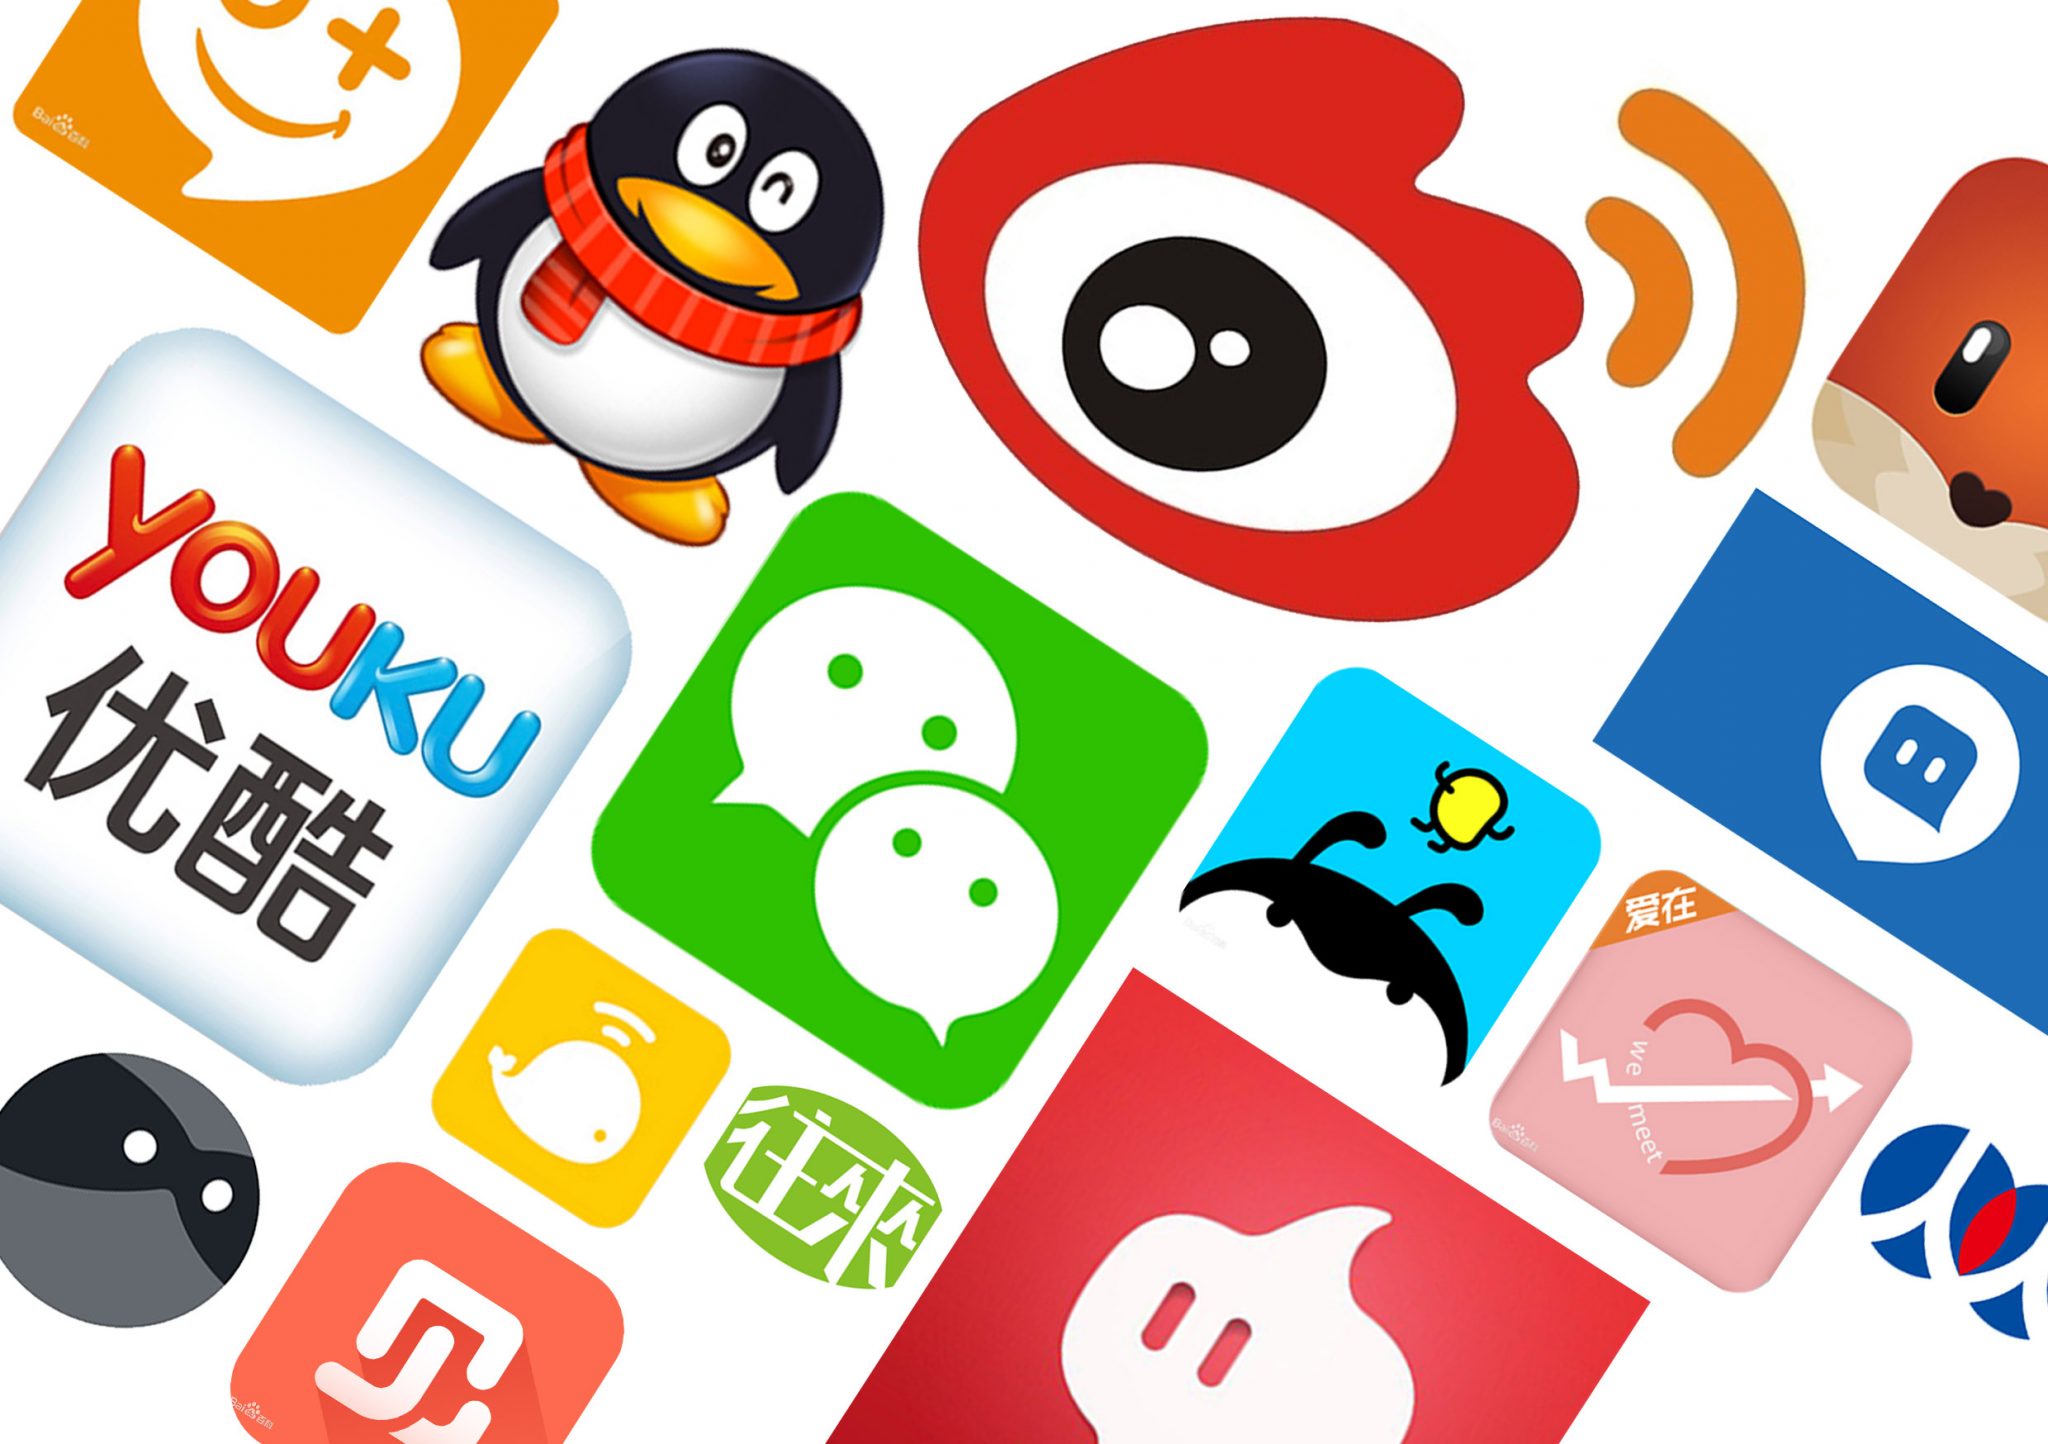 Top 10 Chinese Social Media Apps Top 7 Chinese Social Media Apps You Should Know For 2020 